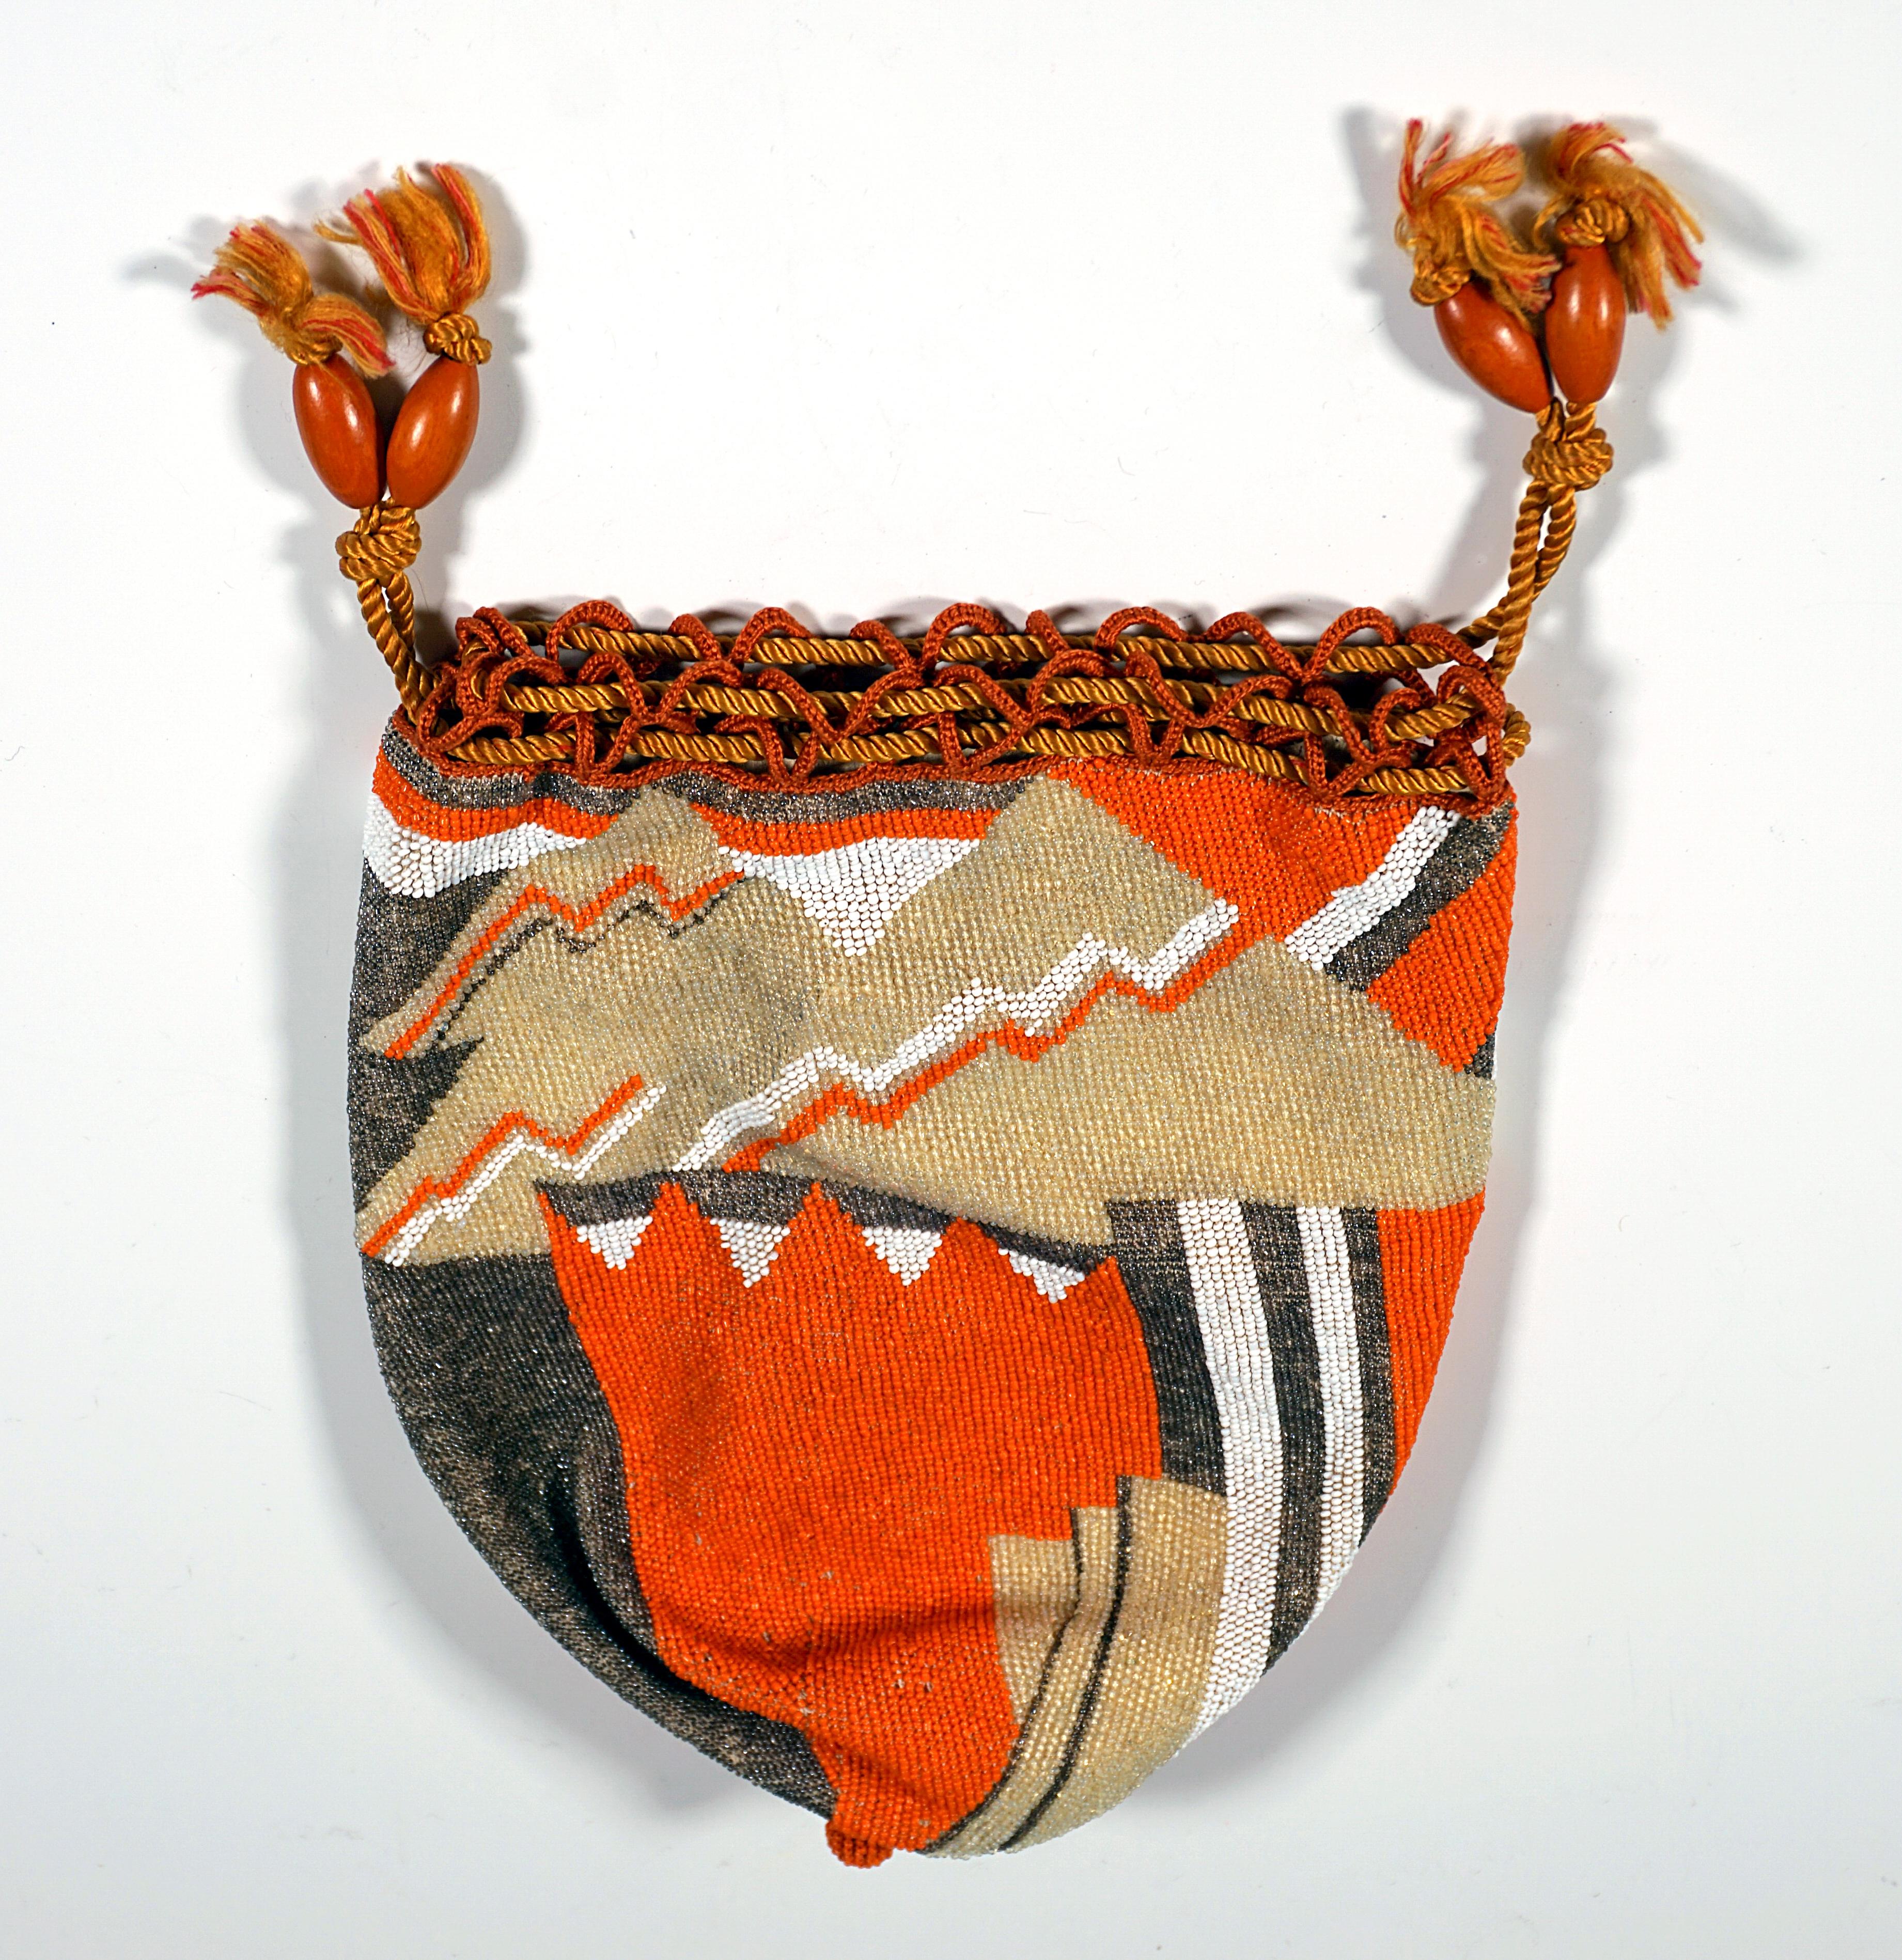 Exceptional, rare pouch bag with abstract bead embroidery in bright orange, beige, dark brown and white, crocheted at the upper edge, cords as drawstrings with olive-shaped wooden beads, lining made of light-coloured goatskin.
Design attributed to